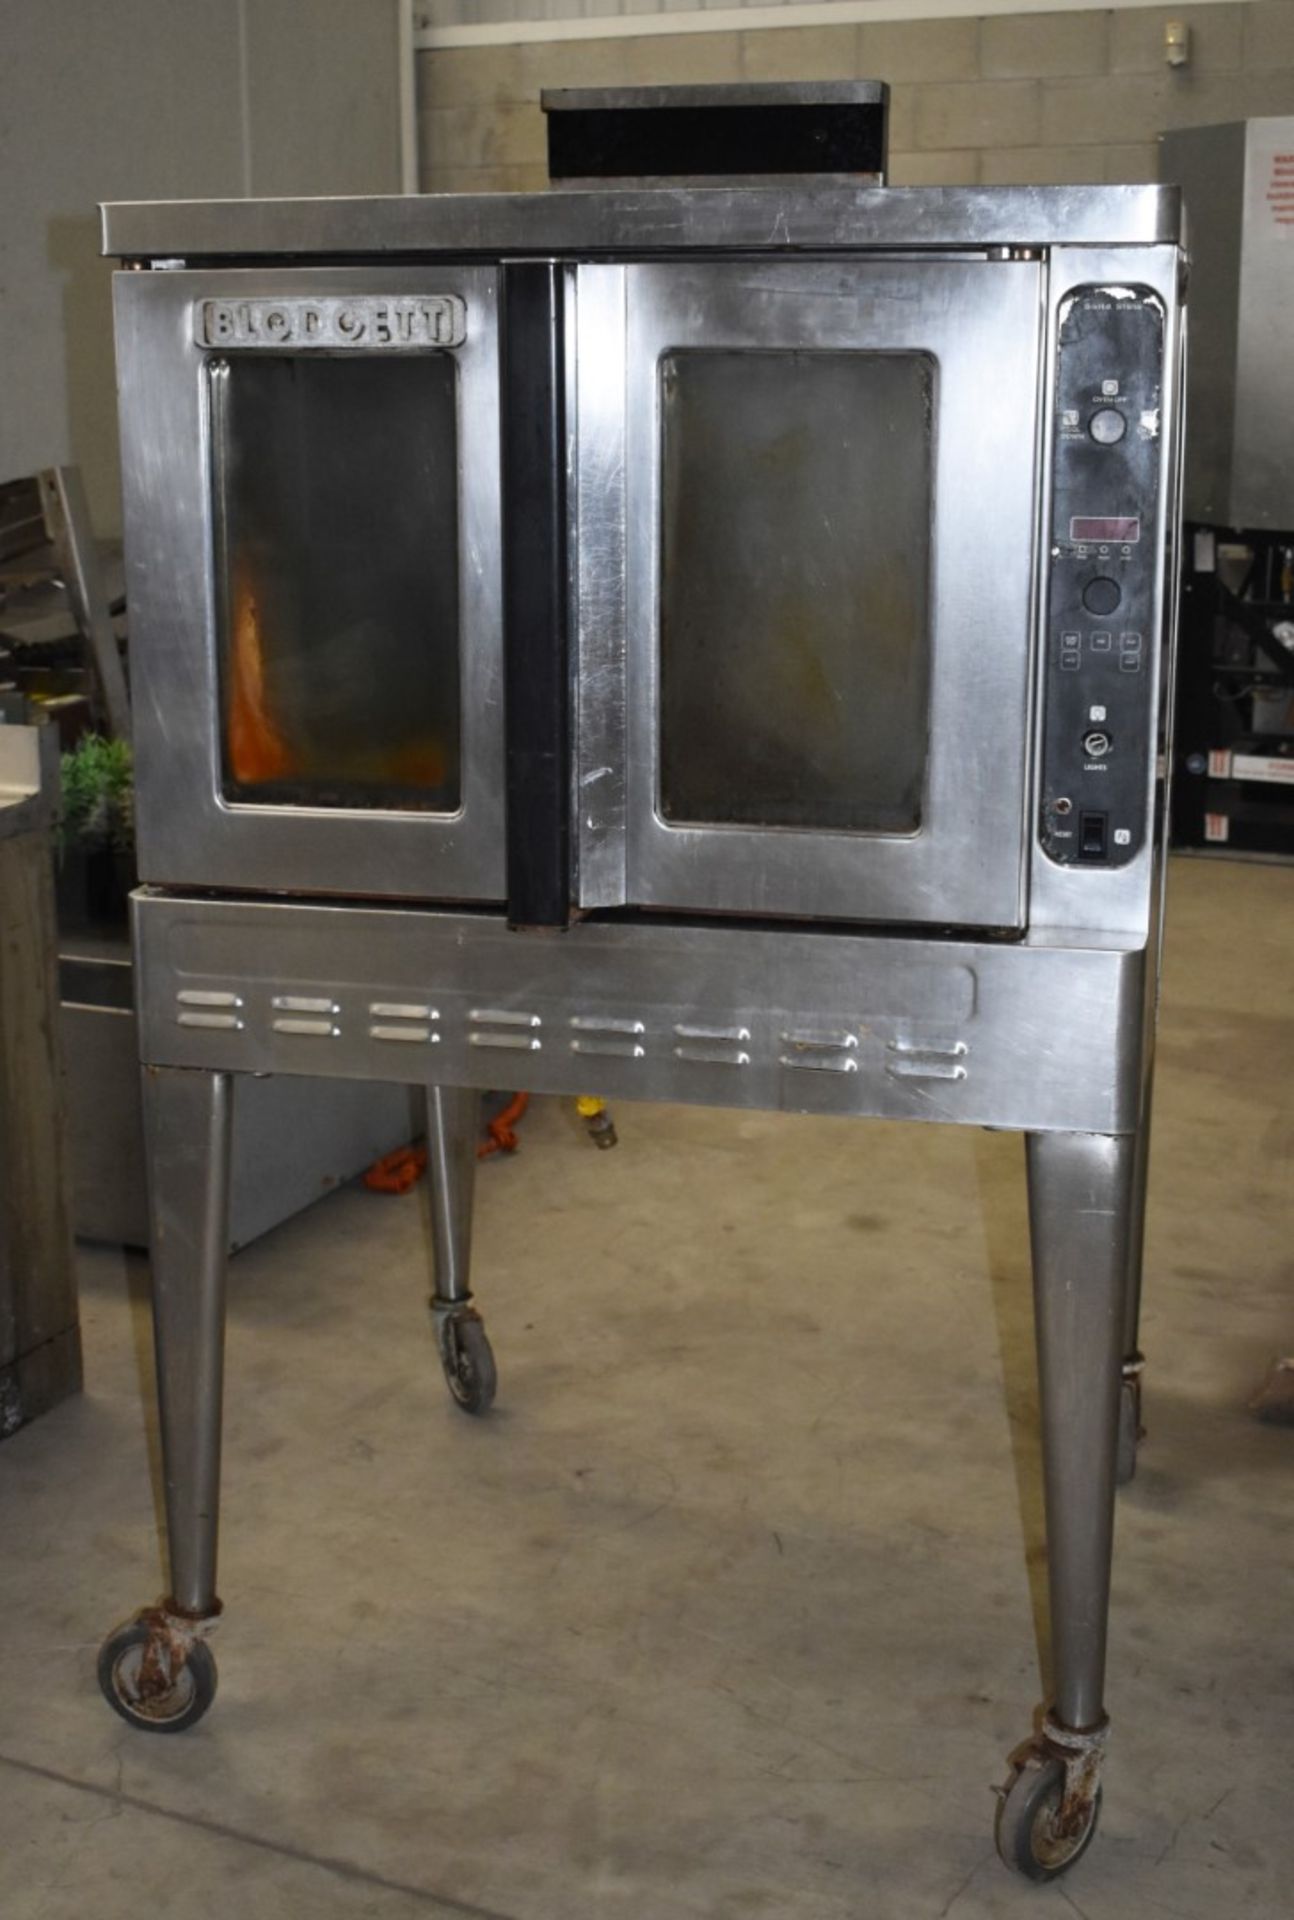 1 x Blodgett Solid State Gas Oven With Stainless Steel Exterior - CL232 - Location: Altrincham WA14 - Image 4 of 5